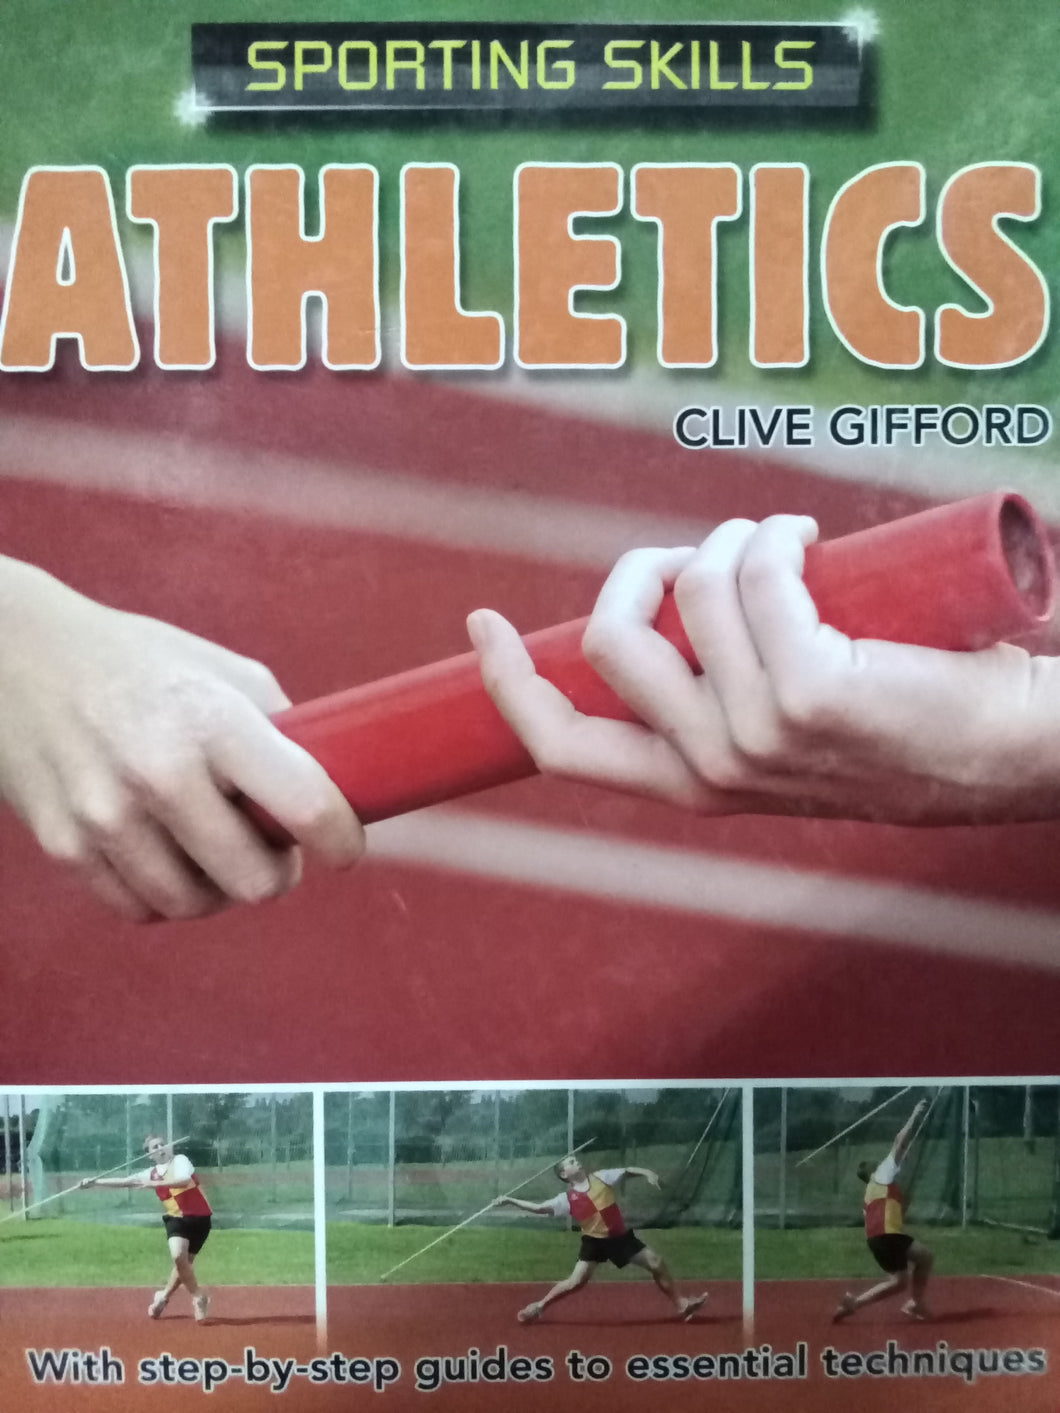 Athletics by Clive Gifford